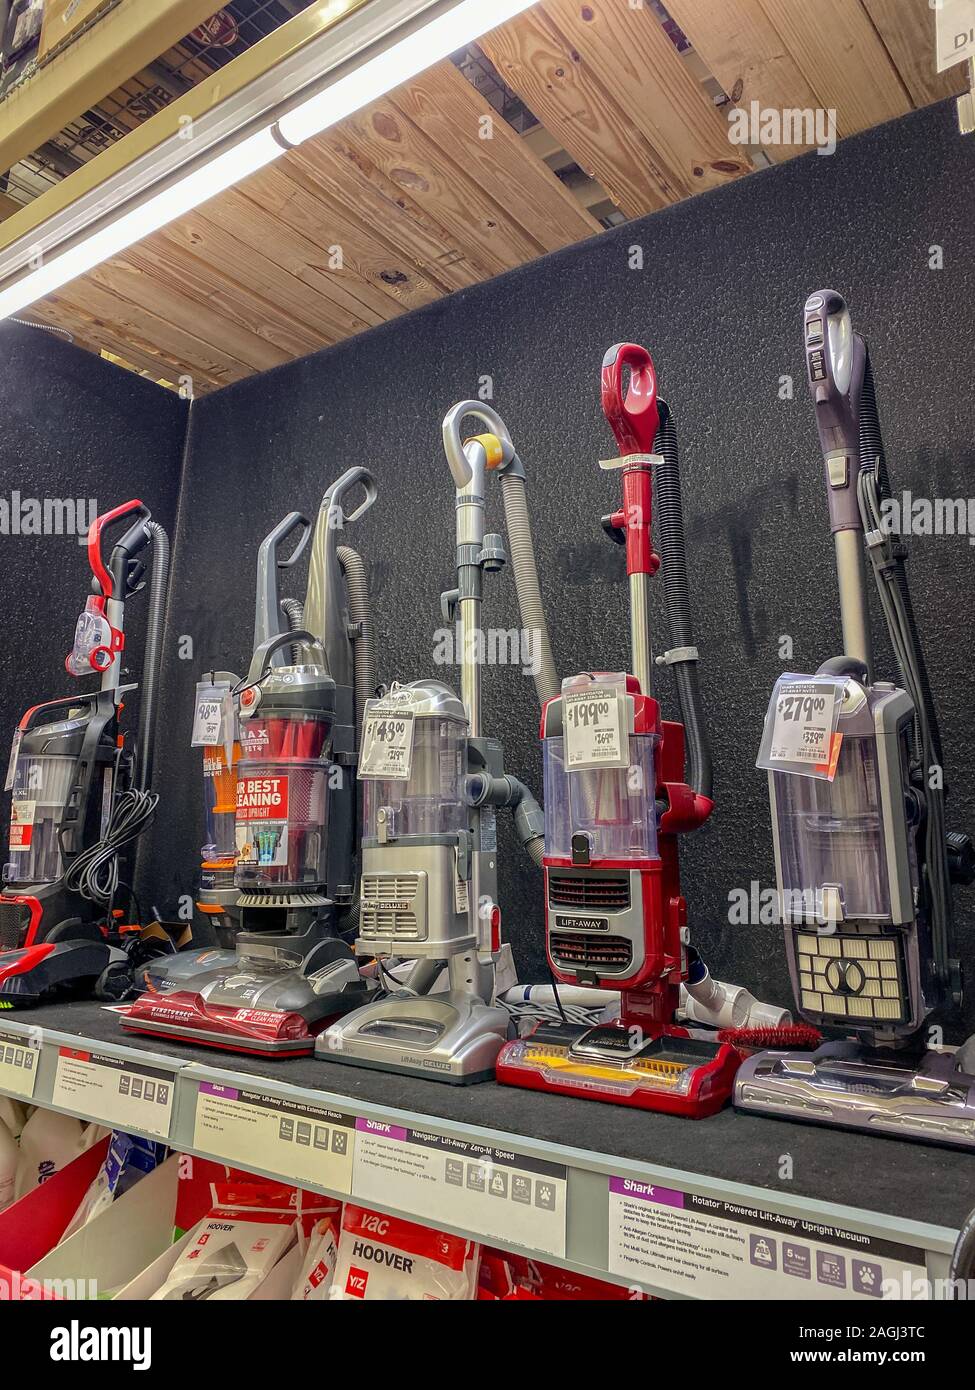 Orlando,FL/USA-11/11/19: A display shelf of vacuums for sale at a Home Depot store. Stock Photo